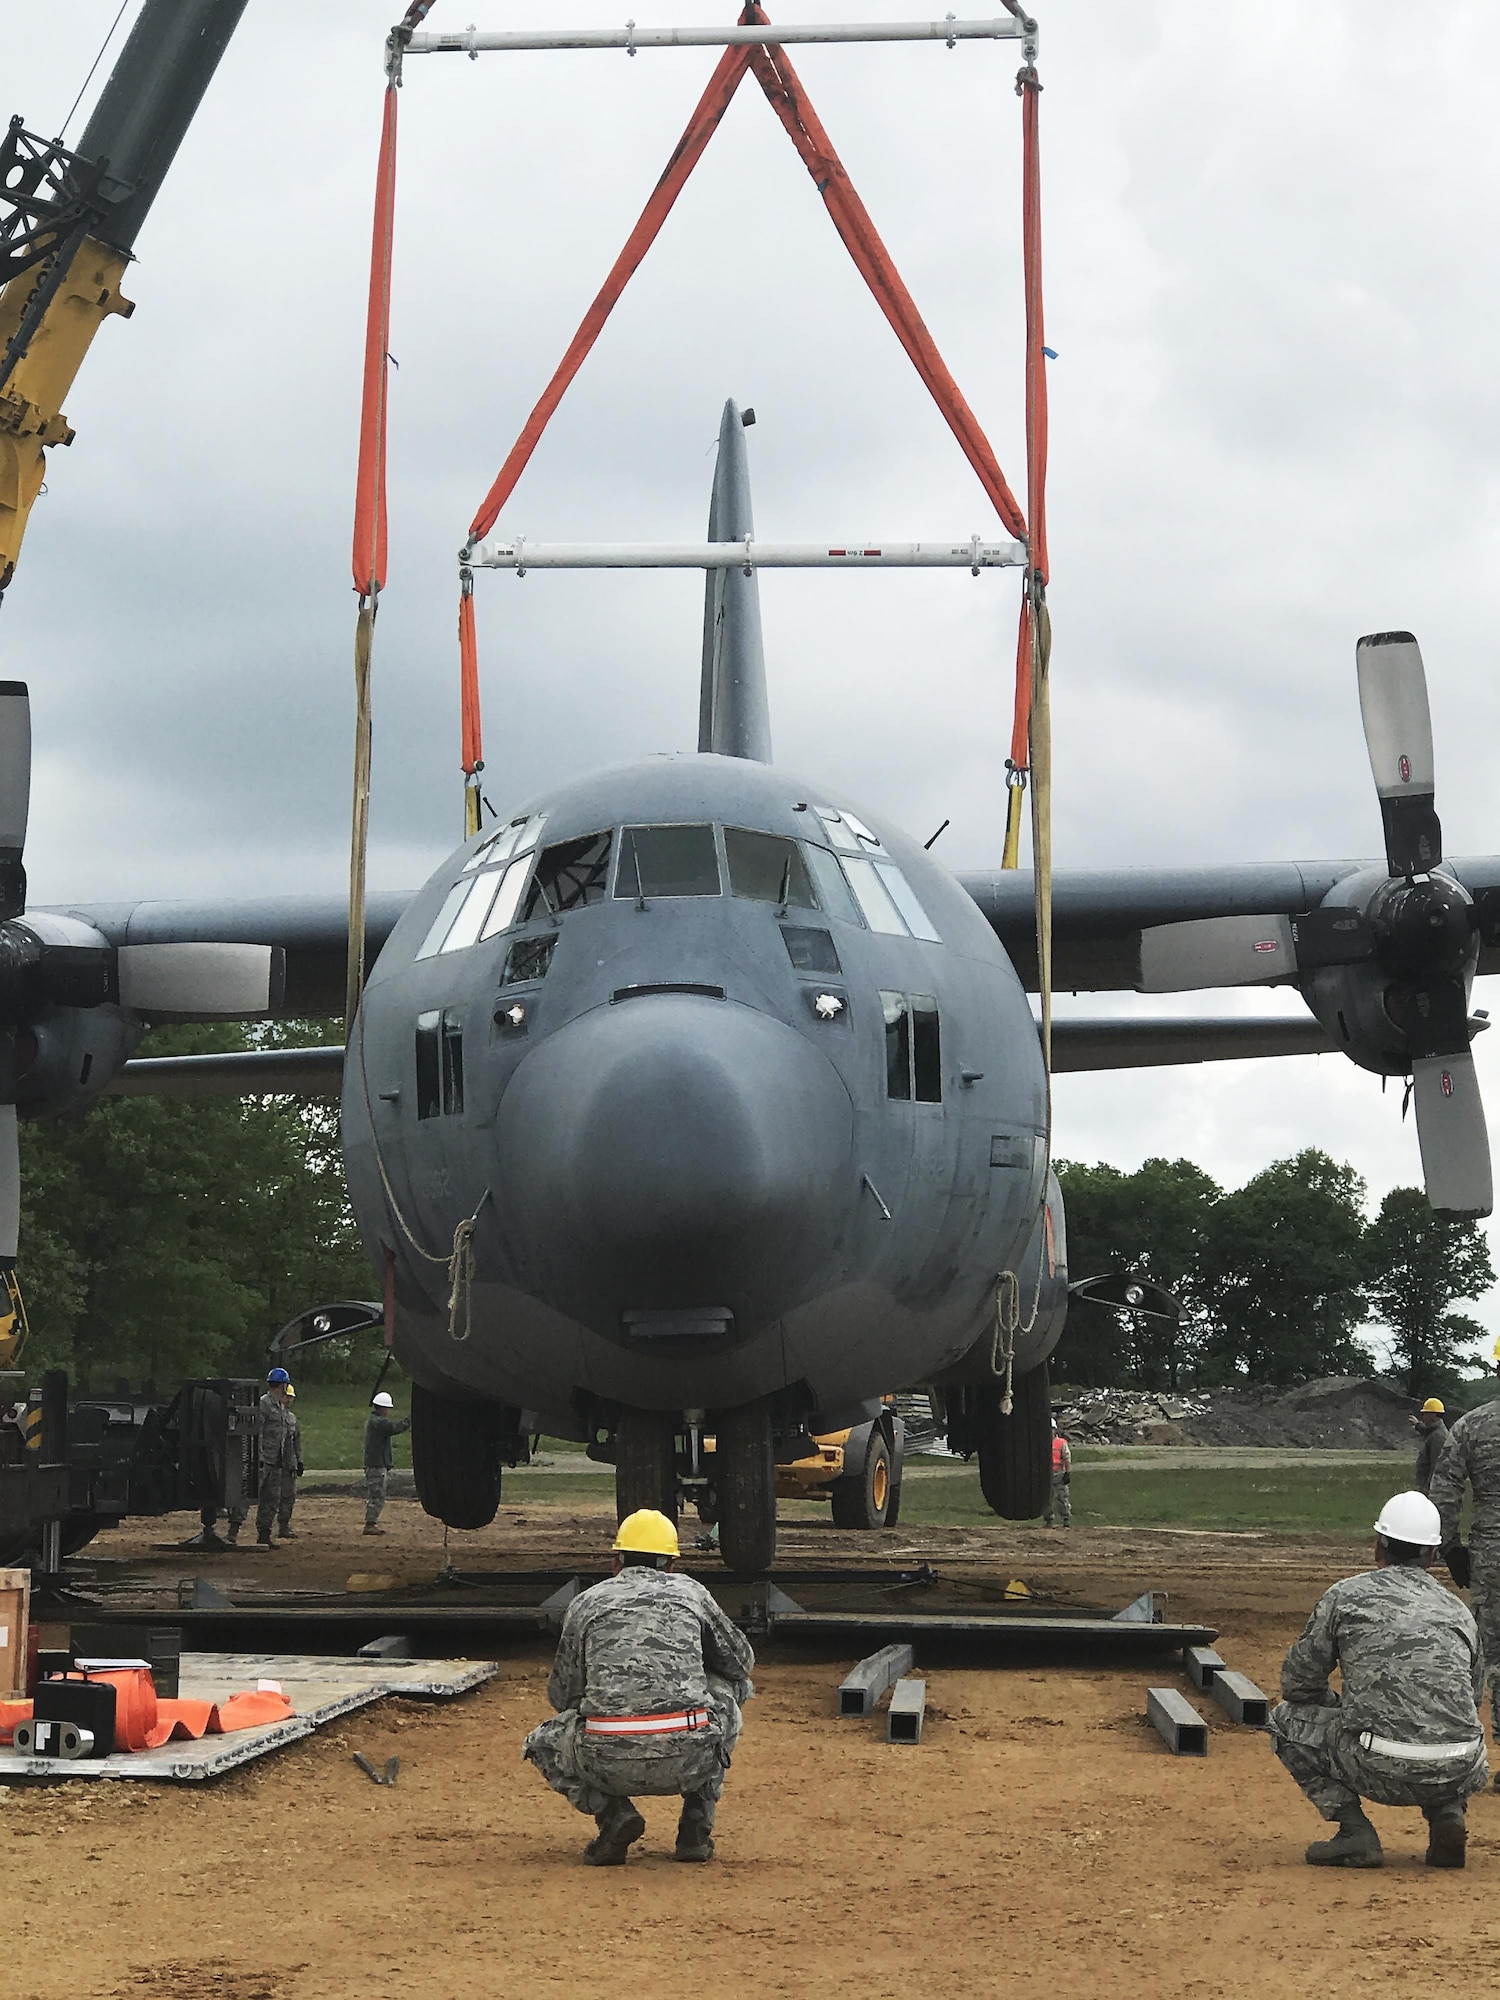 Students attempt to lift a C-130J Special Operations Aircraft that has never been lifted at the Volk Air National Guard base before. The Airmen are students of a Crash Damage or Disabled Aircraft Recover (CDDAR) training course hosted at the base on May 23. They are lifting the 84,000-pound aircraft to fulfill a training requirement for CDDAR team members. Wisconsin National Guard photo by Maj. Penny Ripperger